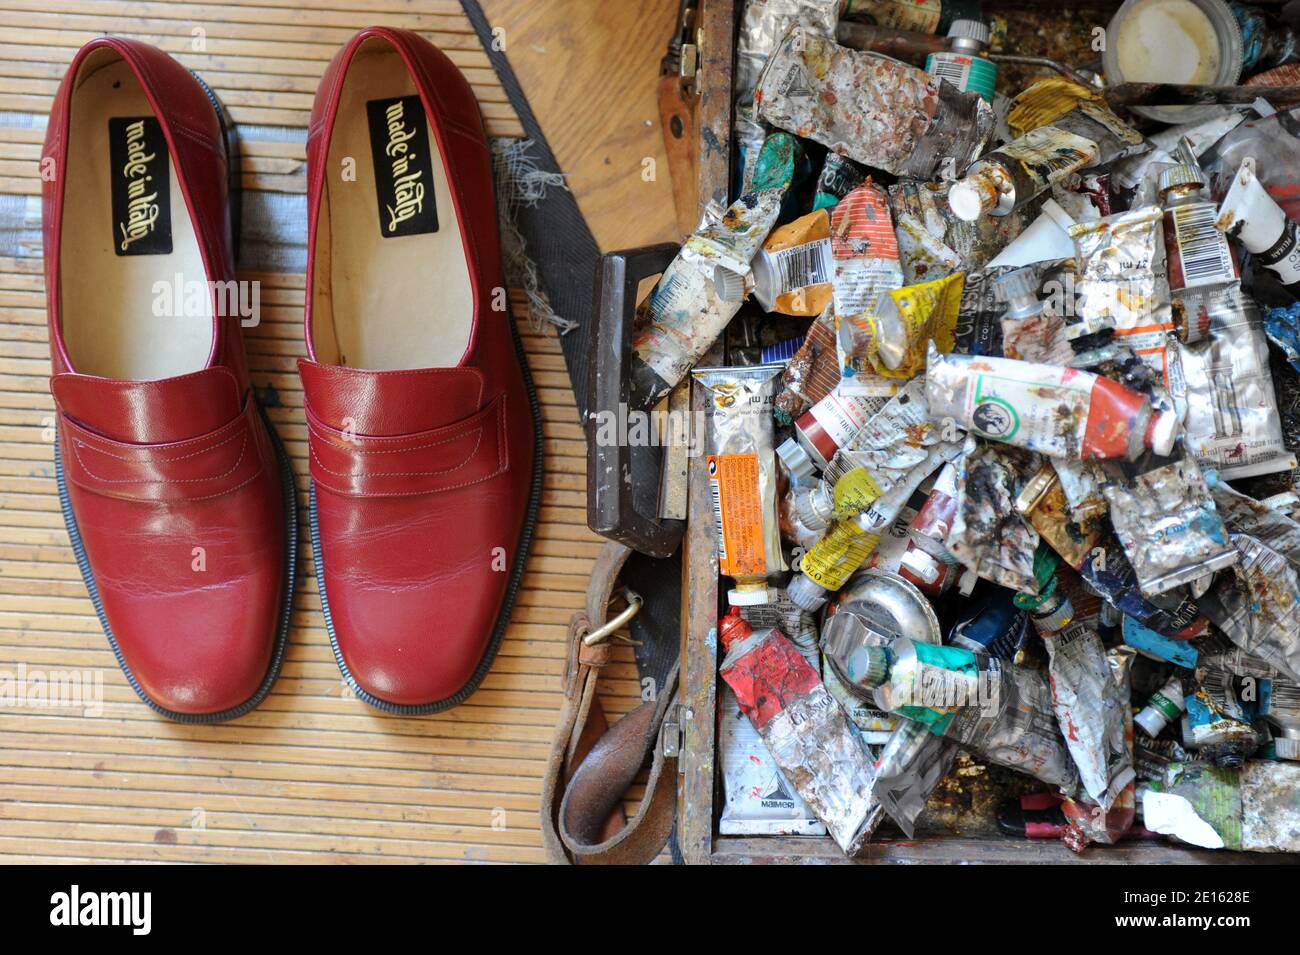 Benedict XVI's shoes given by the Vatican to Natalia Tsarkova . Rome,Italy  on April 18,2011. This attractive young Orthodox Russian was John Paul II?s  official painter. John Paul II has left a